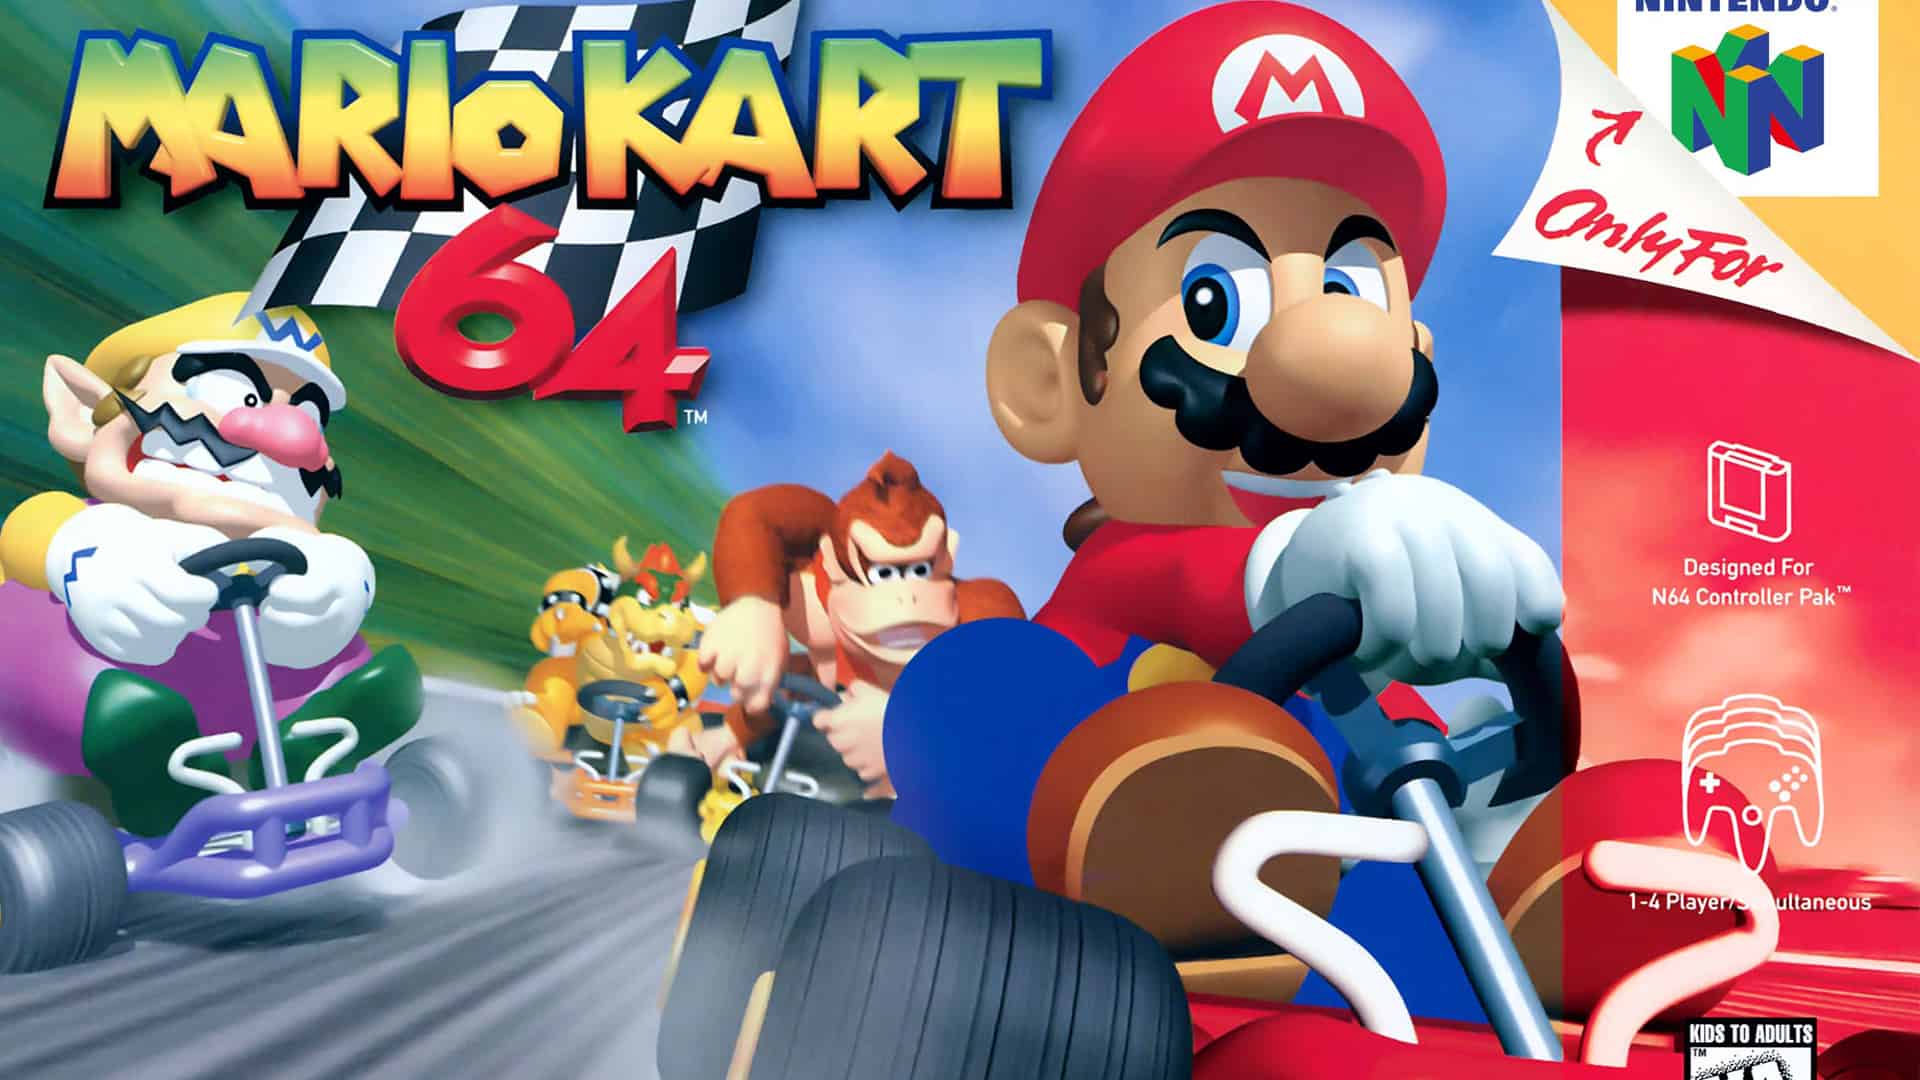 Mario Kart 64 coming to Switch via Expansion Pack subscription